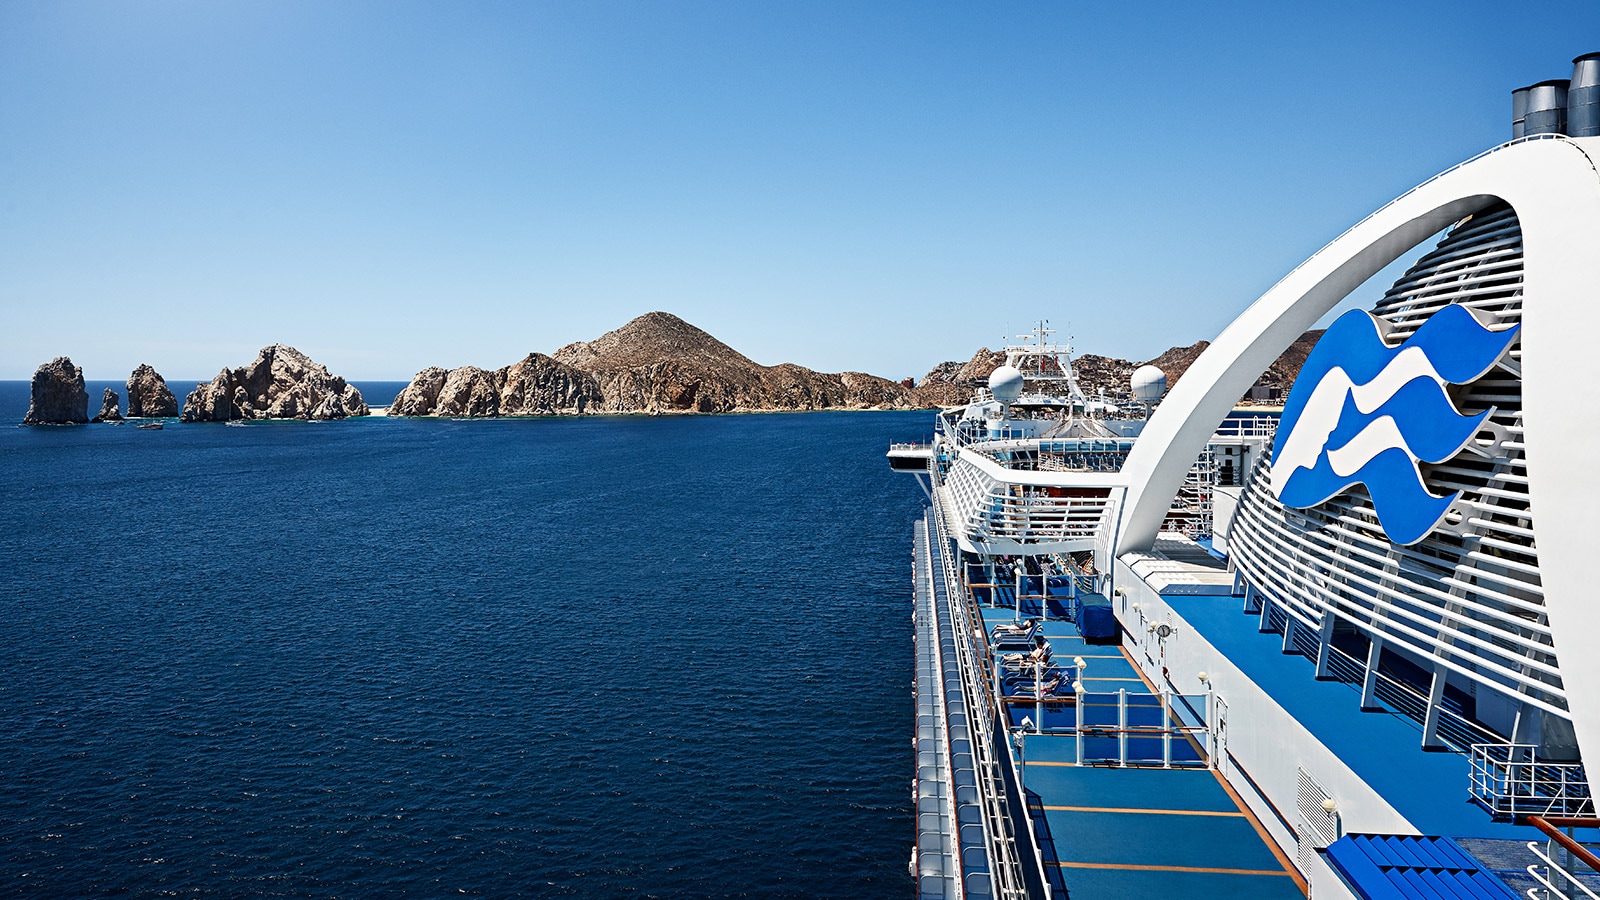 princess cruises to mexico in 2023